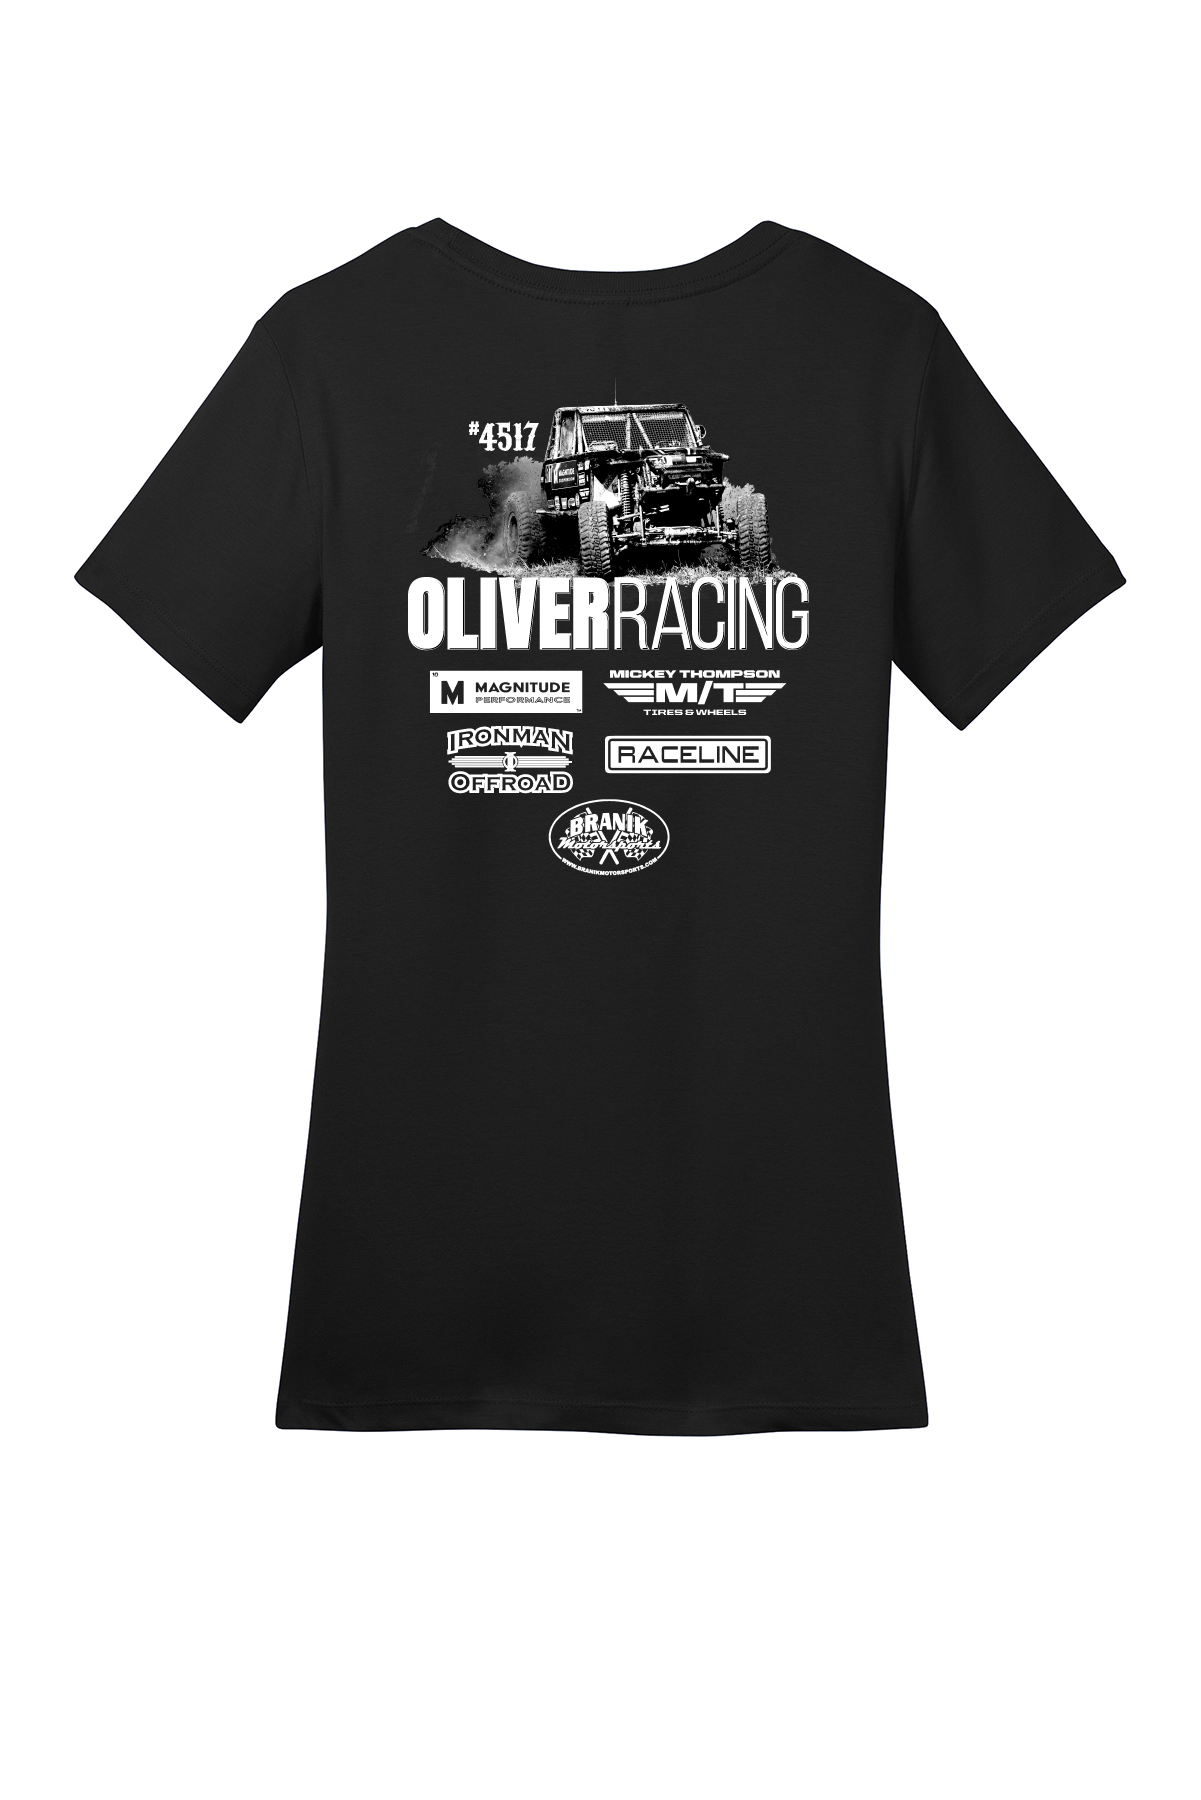 Oliver Racing #4517